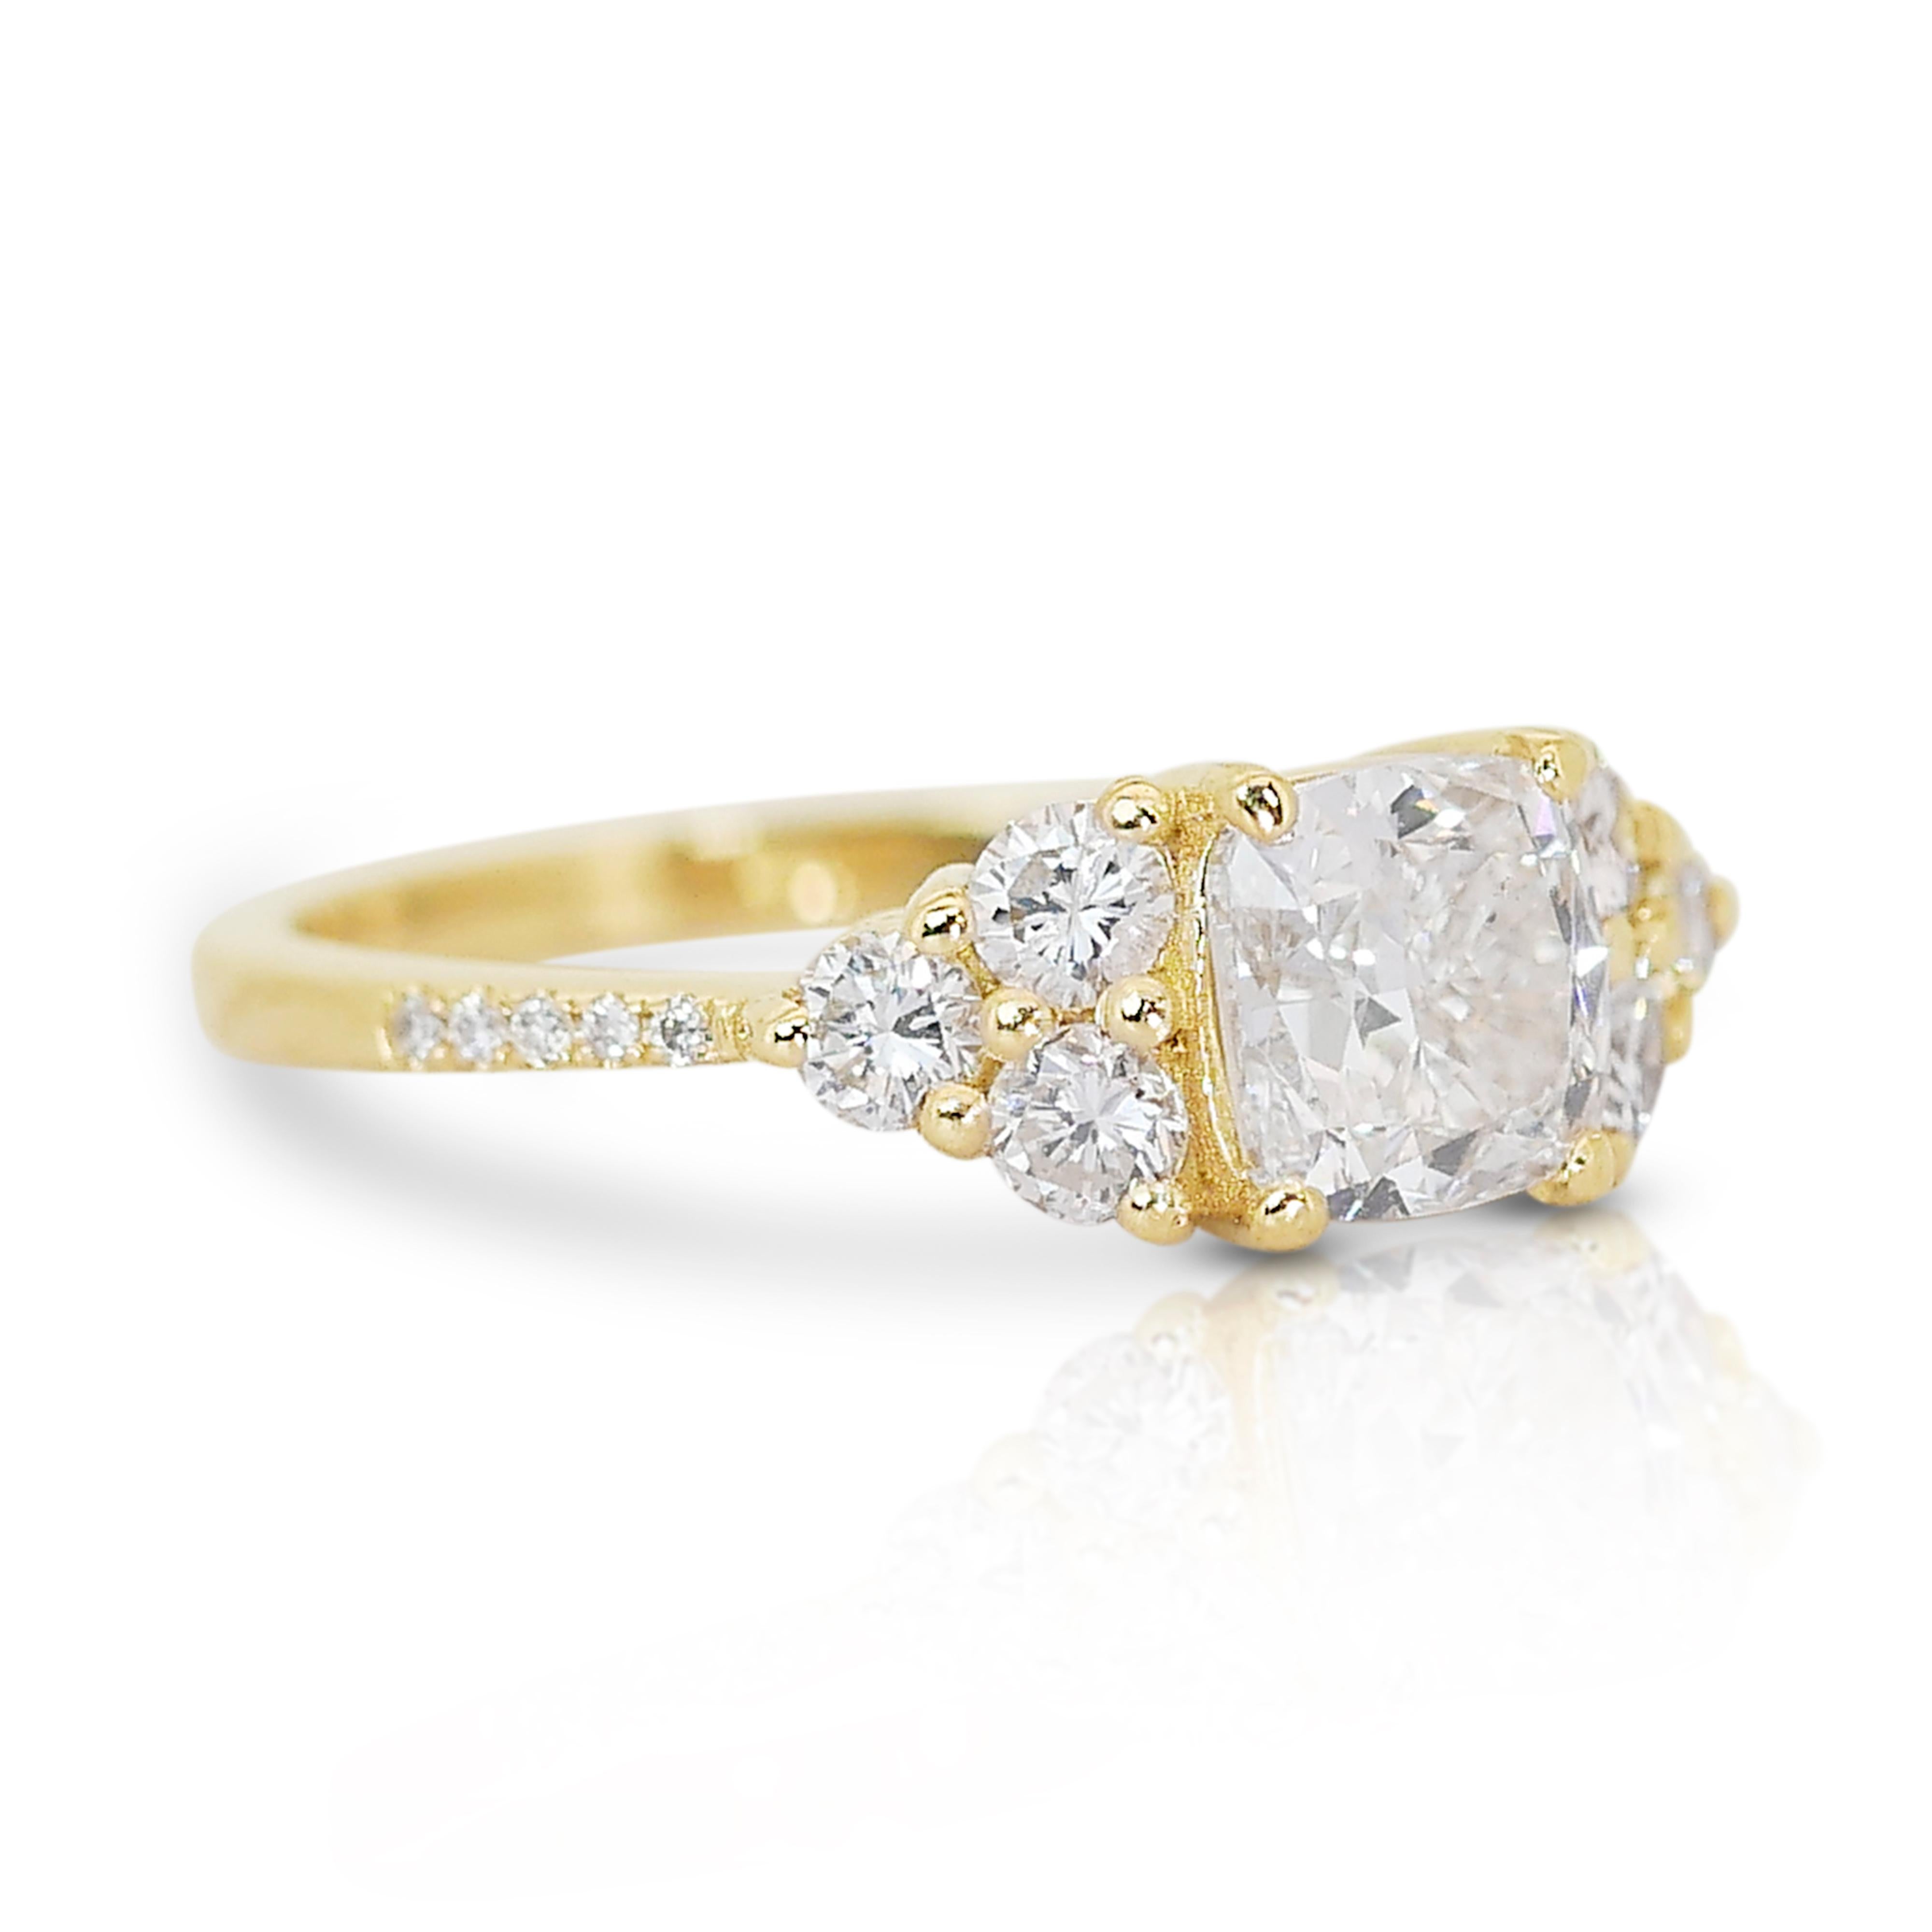 Luxurious 18k Yellow Gold Diamond Pave Ring w/1.70 ct - IGI Certified

This exquisite 18k yellow gold ring is a masterpiece of craftsmanship and elegance, featuring a magnificent 1.20 ct square cushion-shaped diamond as its centerpiece. Encircling